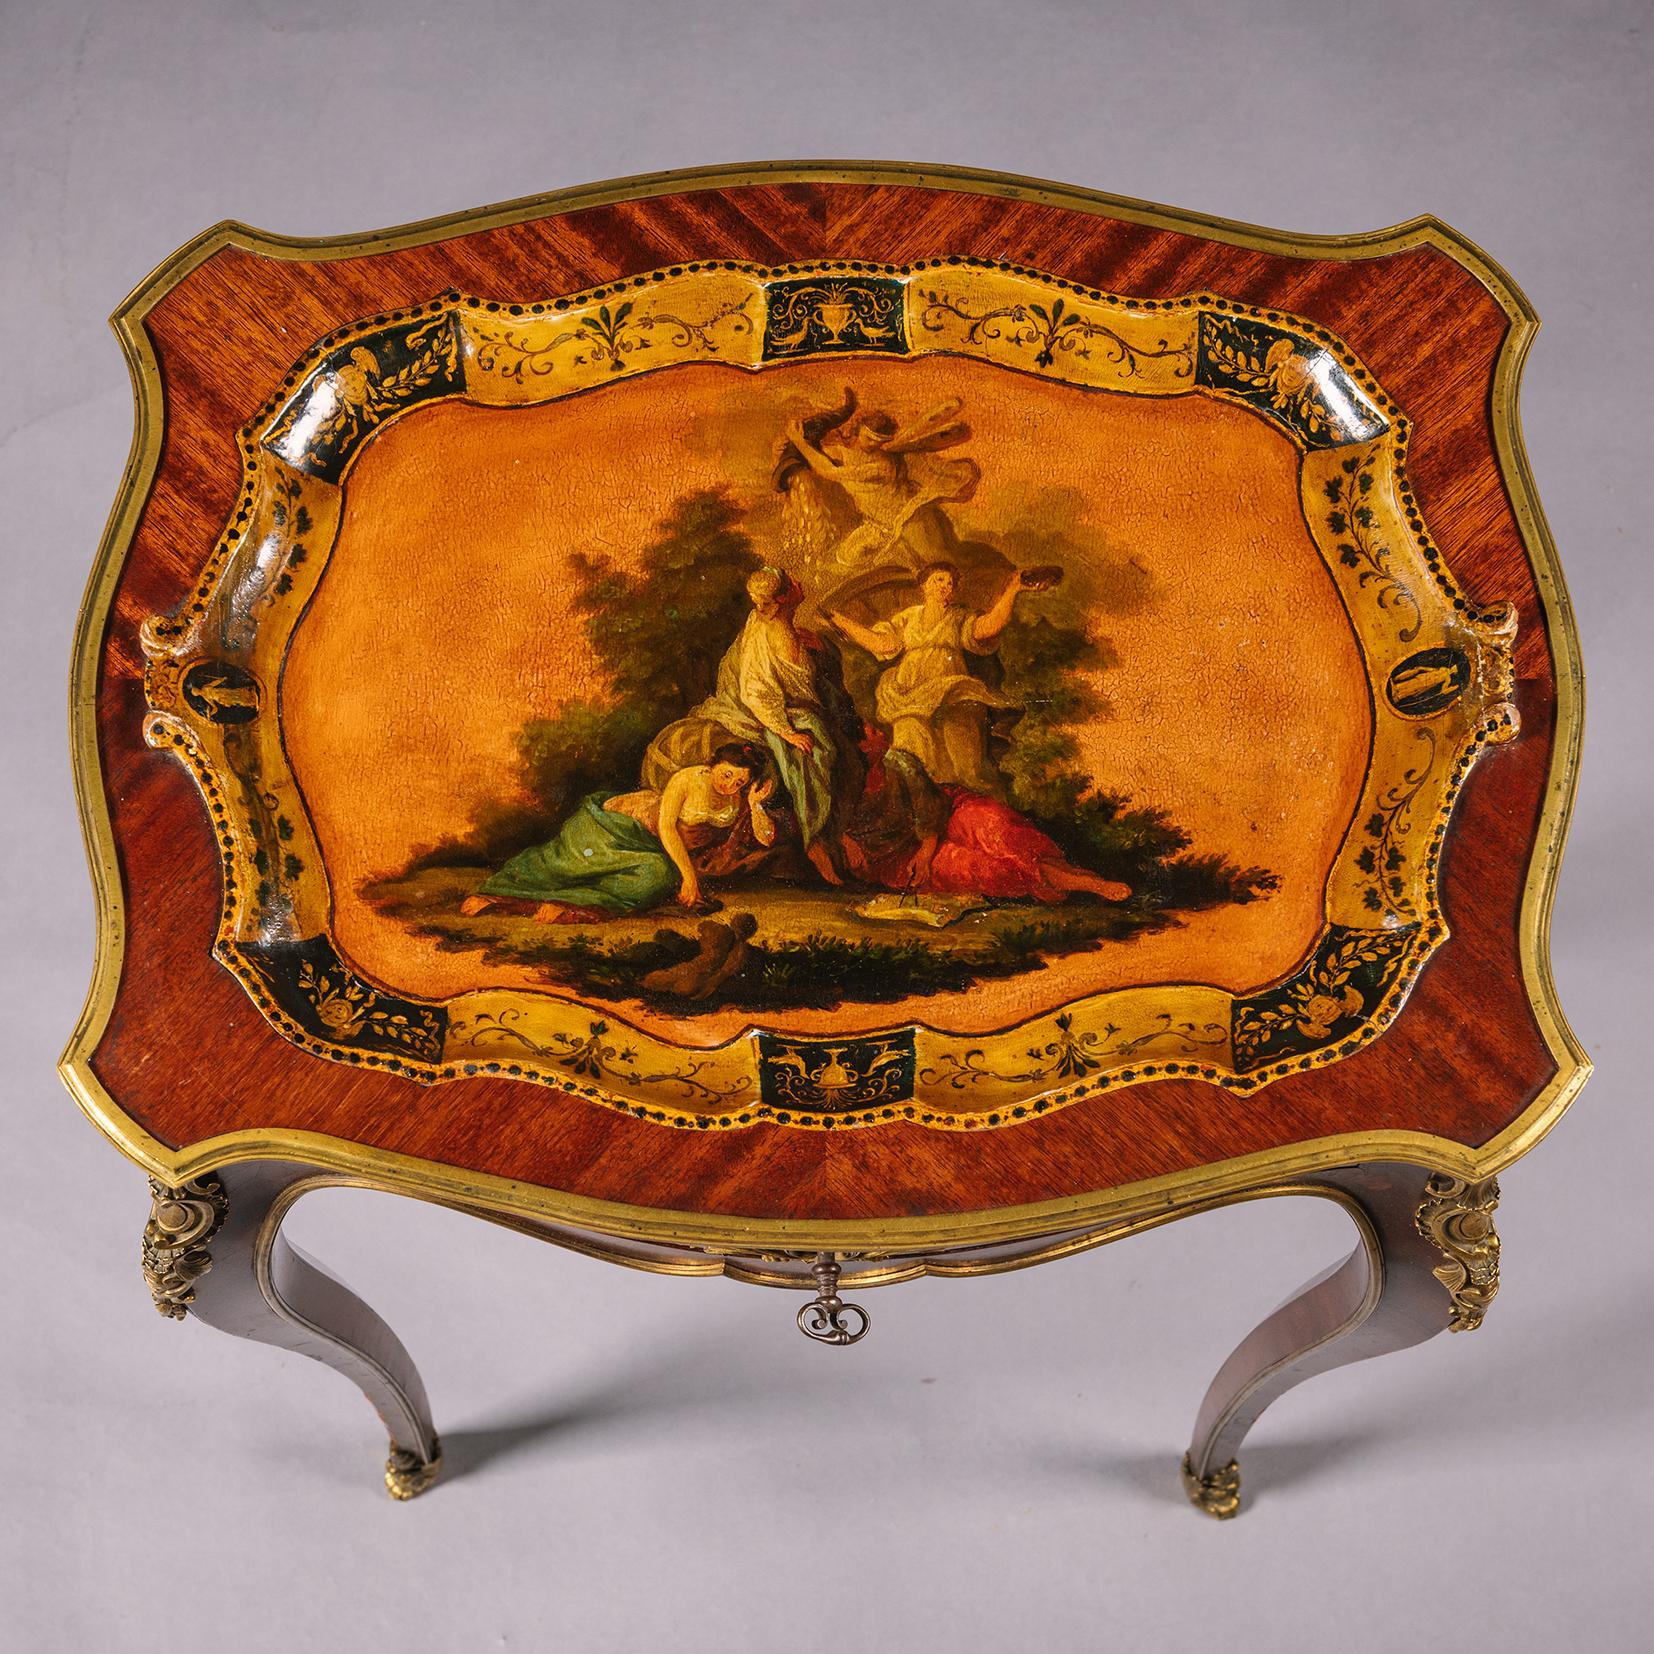 A Fine Louis XV Style Gilt-Bronze Mounted Bois Satiné and Lacquered Tray-Top Table, by Henry Dasson. 

This elegant table is inset to the top with a lacquered tray decorated with a scene of fortune and abundance within a neoclassical ornamented